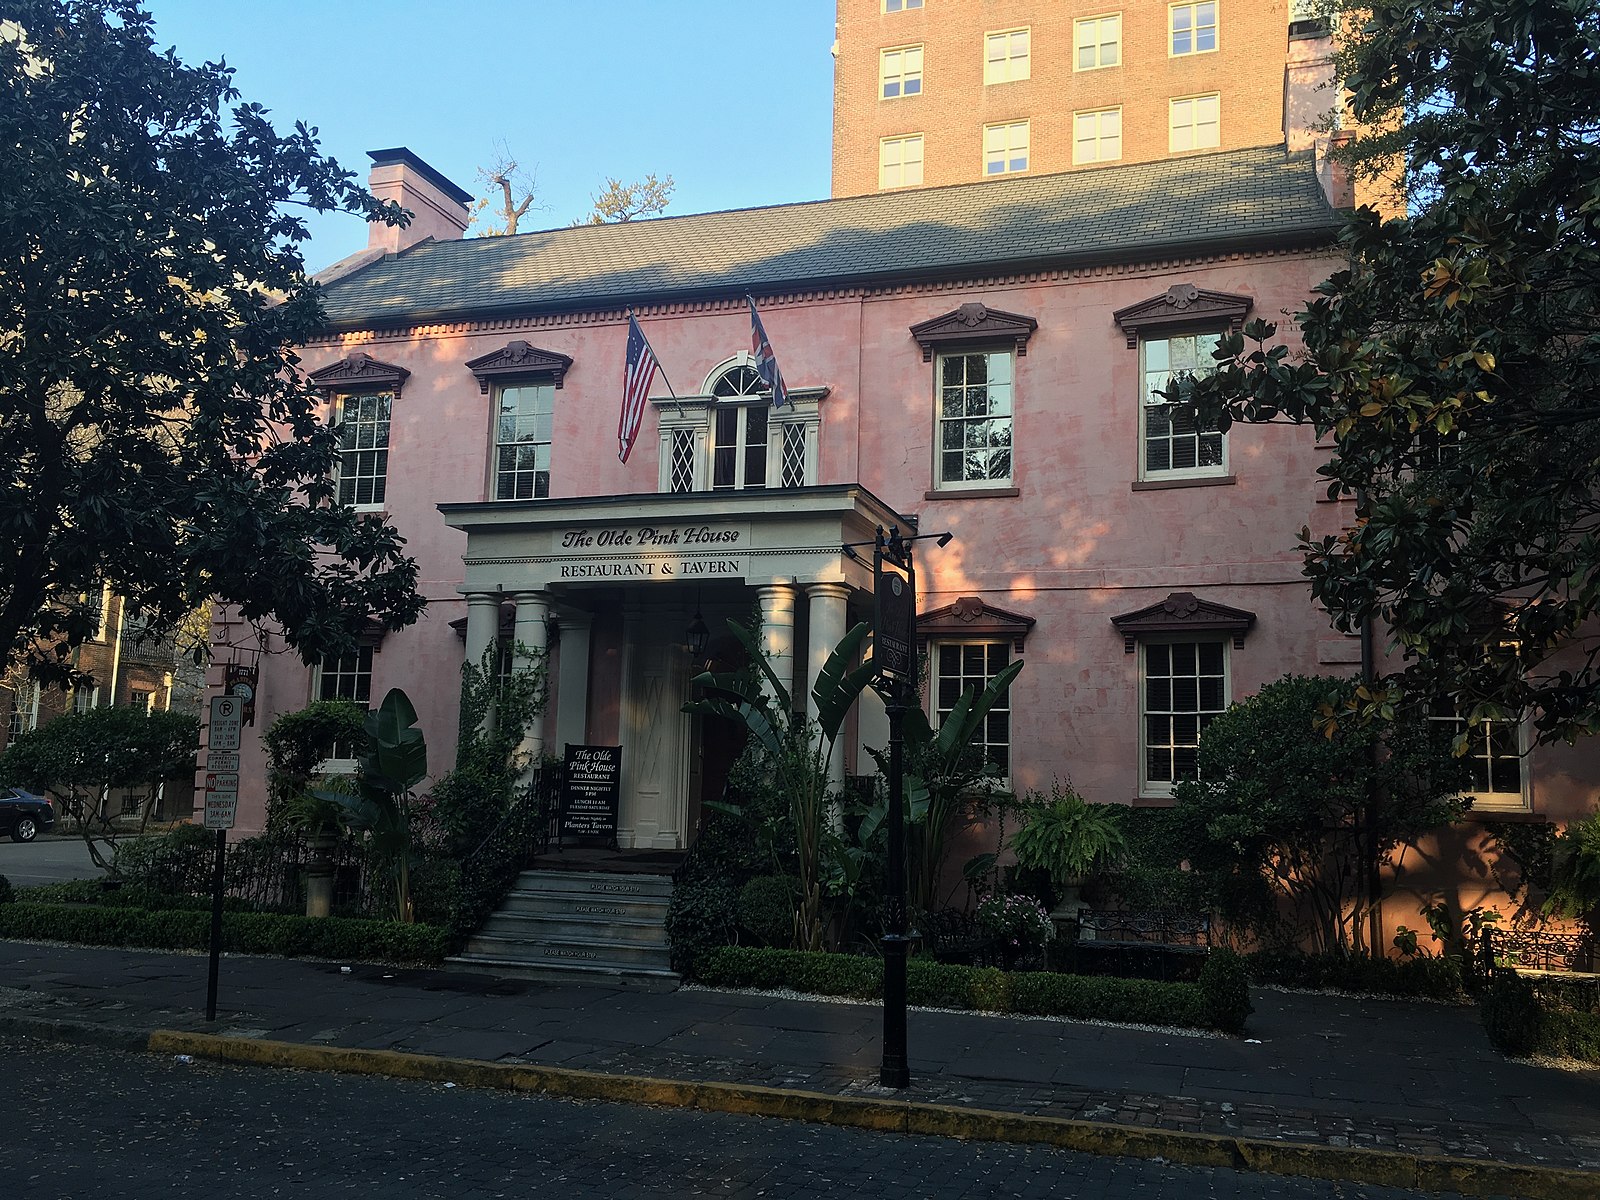 The facade of the Olde Pink House flanked by trees and landscaping.